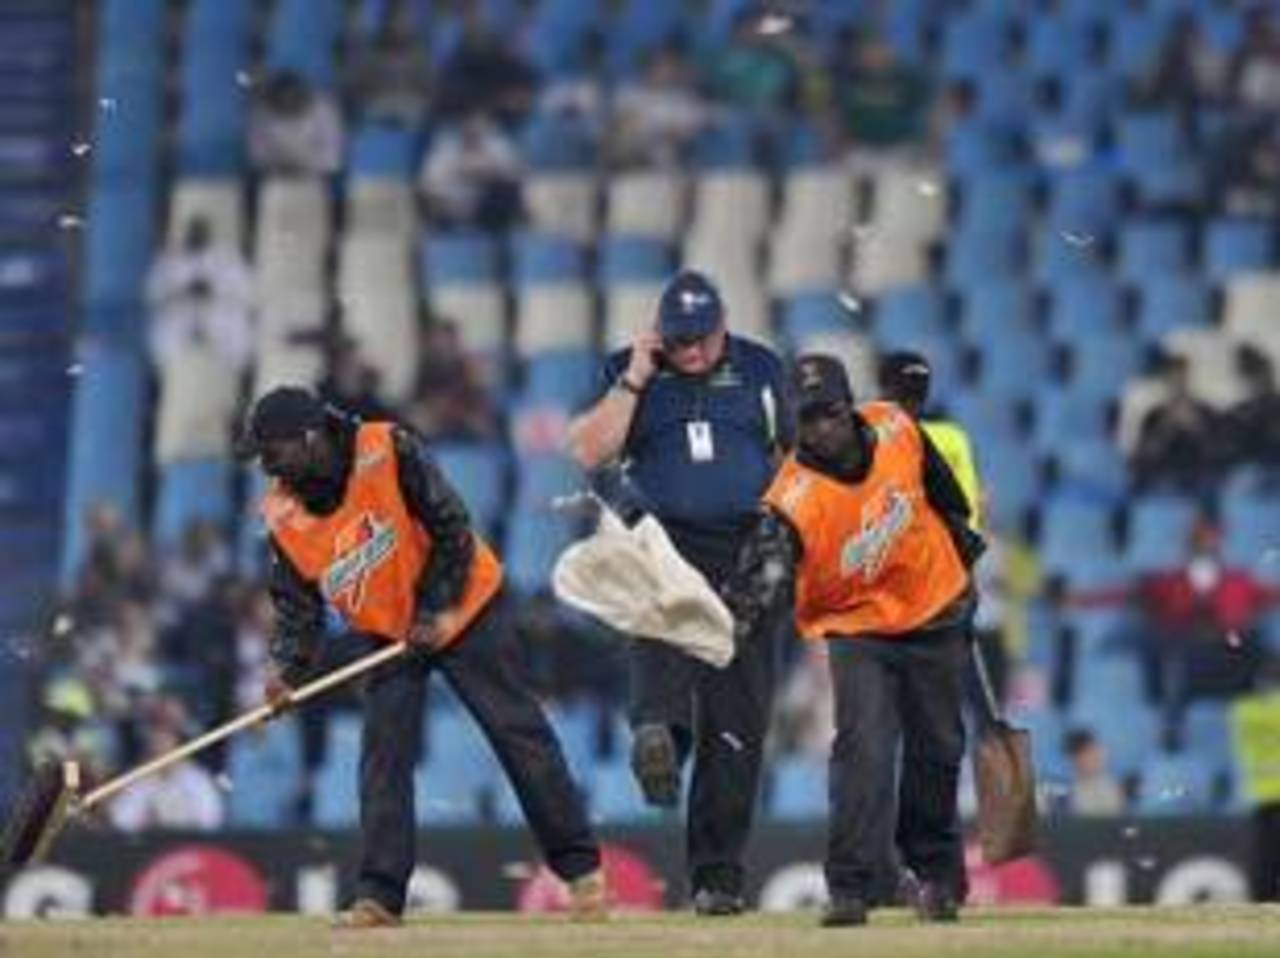 The Champions Trophy semi-final: being optioned for a horror movie soon&nbsp;&nbsp;&bull;&nbsp;&nbsp;AFP